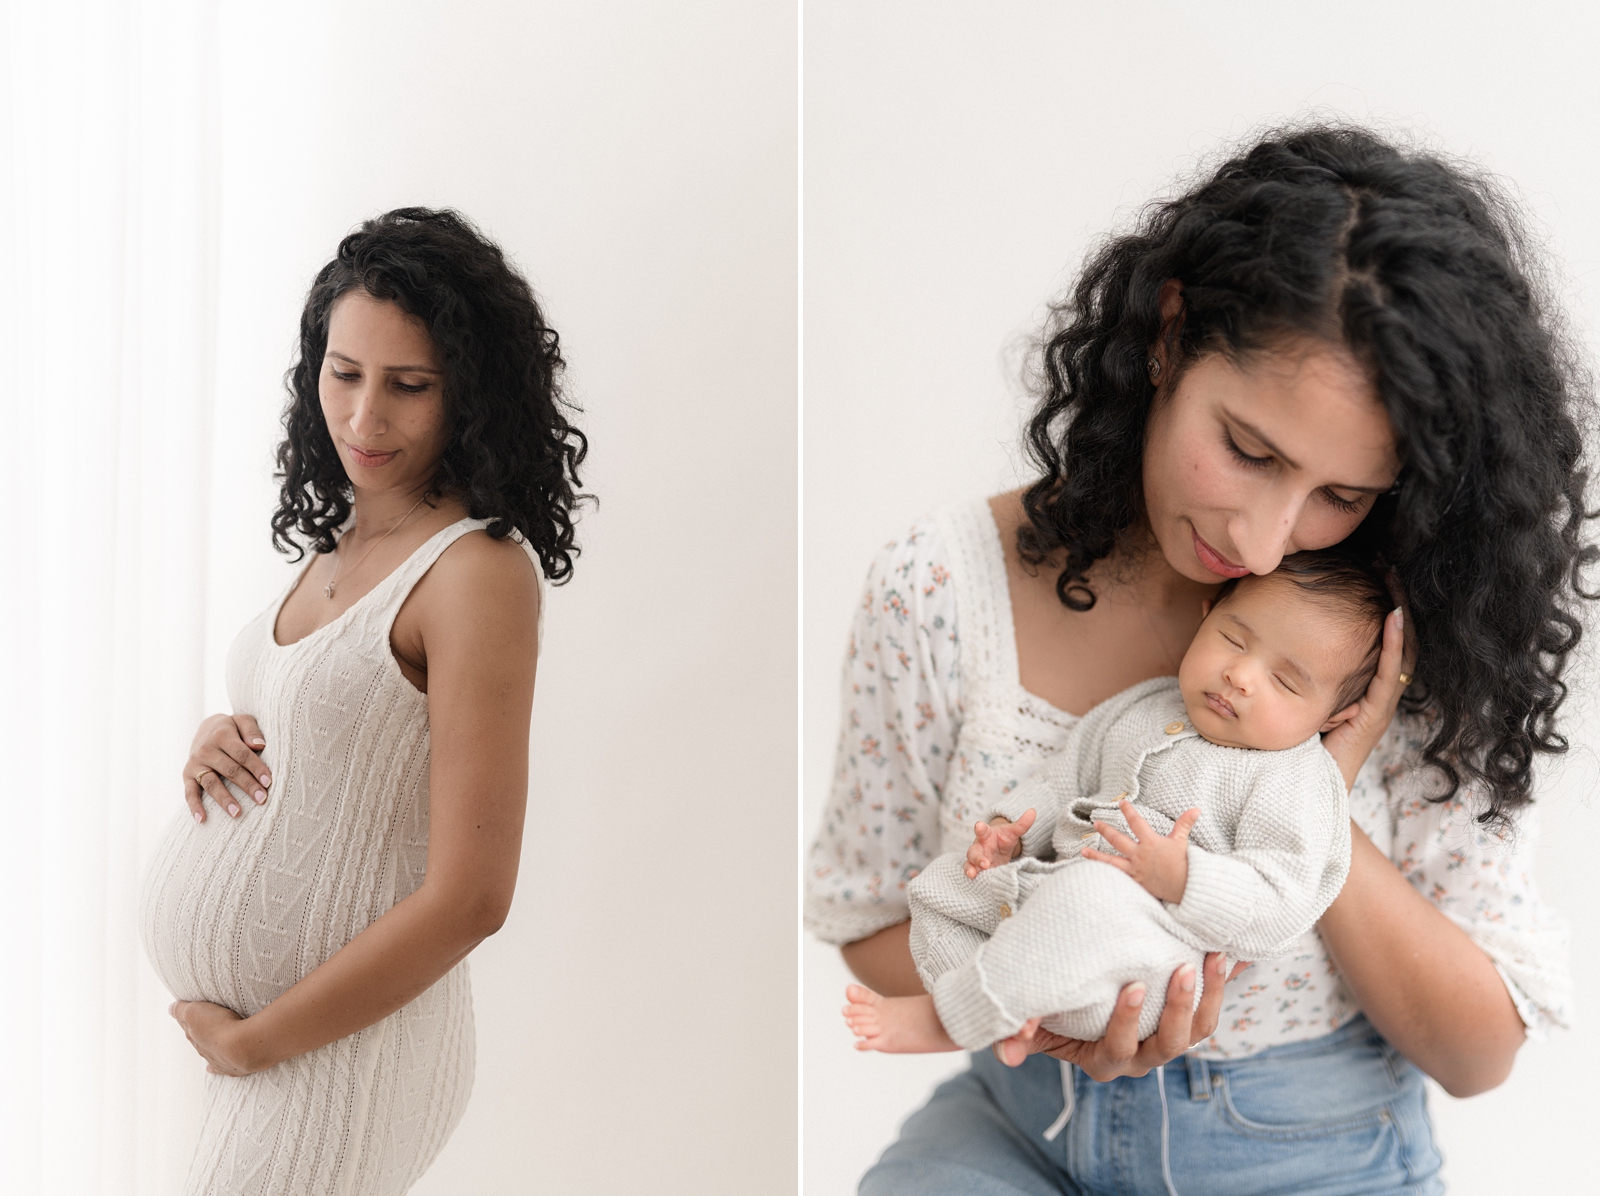 Documenting your pregnancy and new baby with maternity and newborn photography